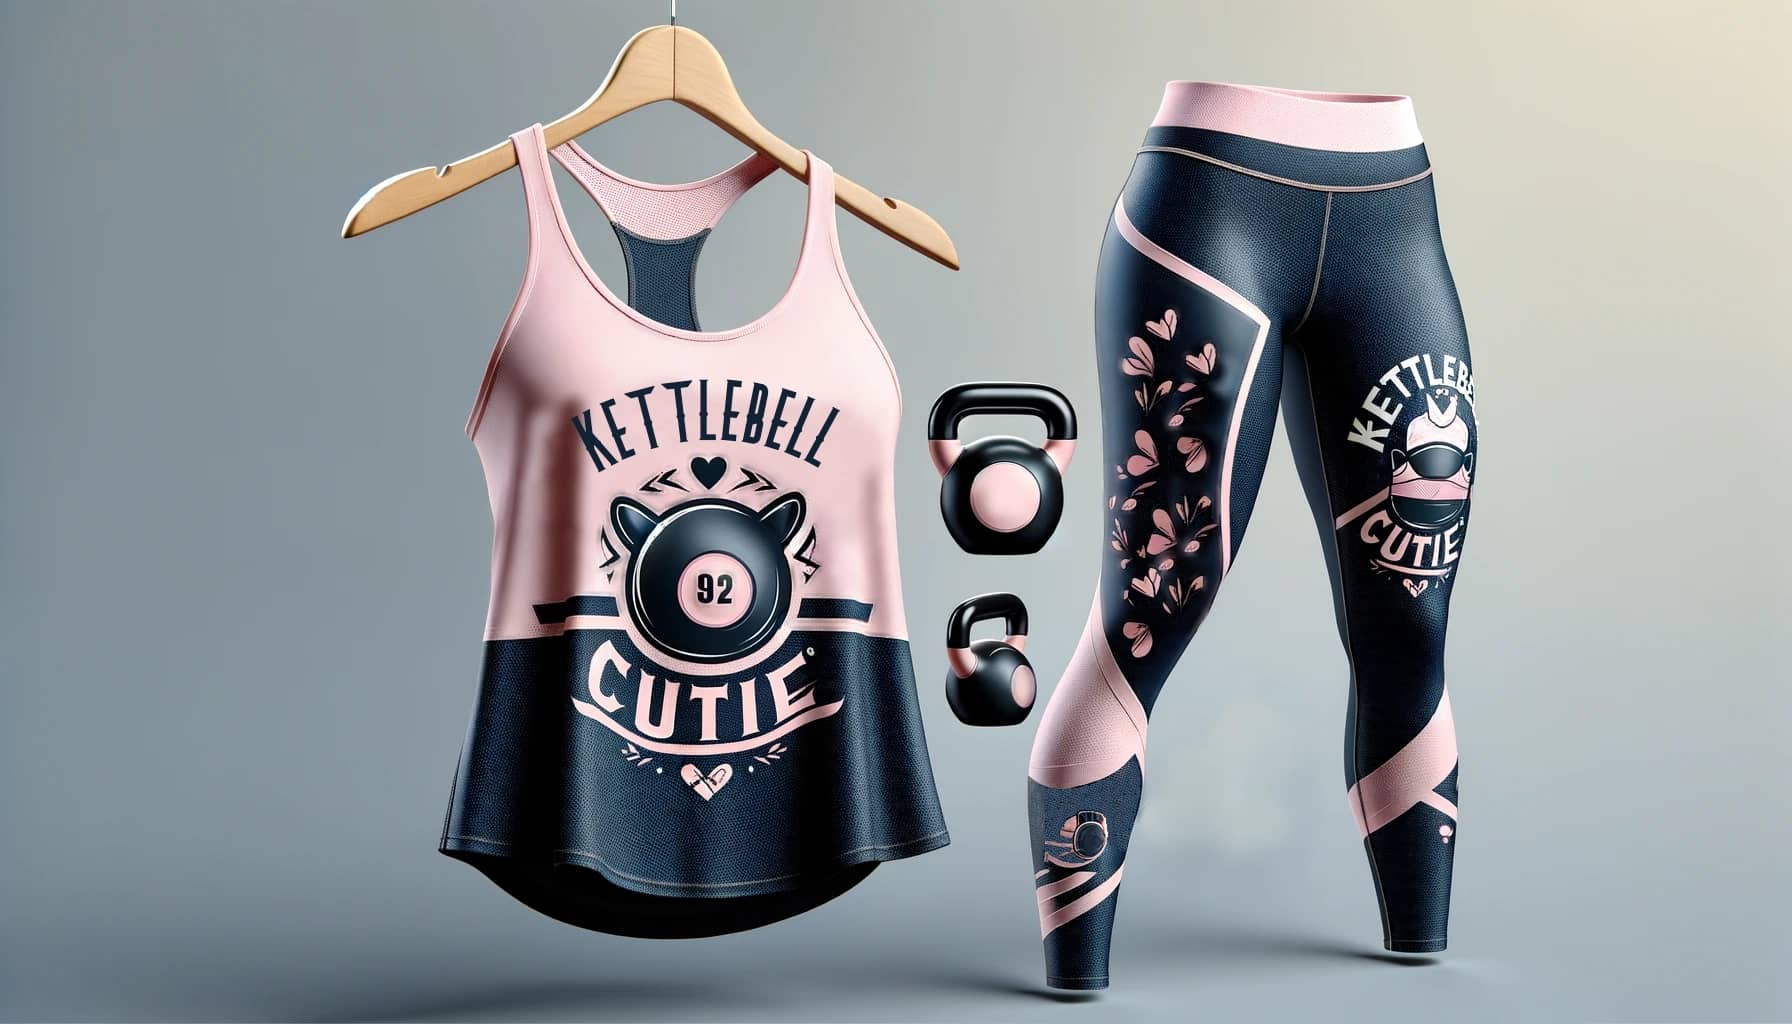 Fitness clothing brand name ideas.